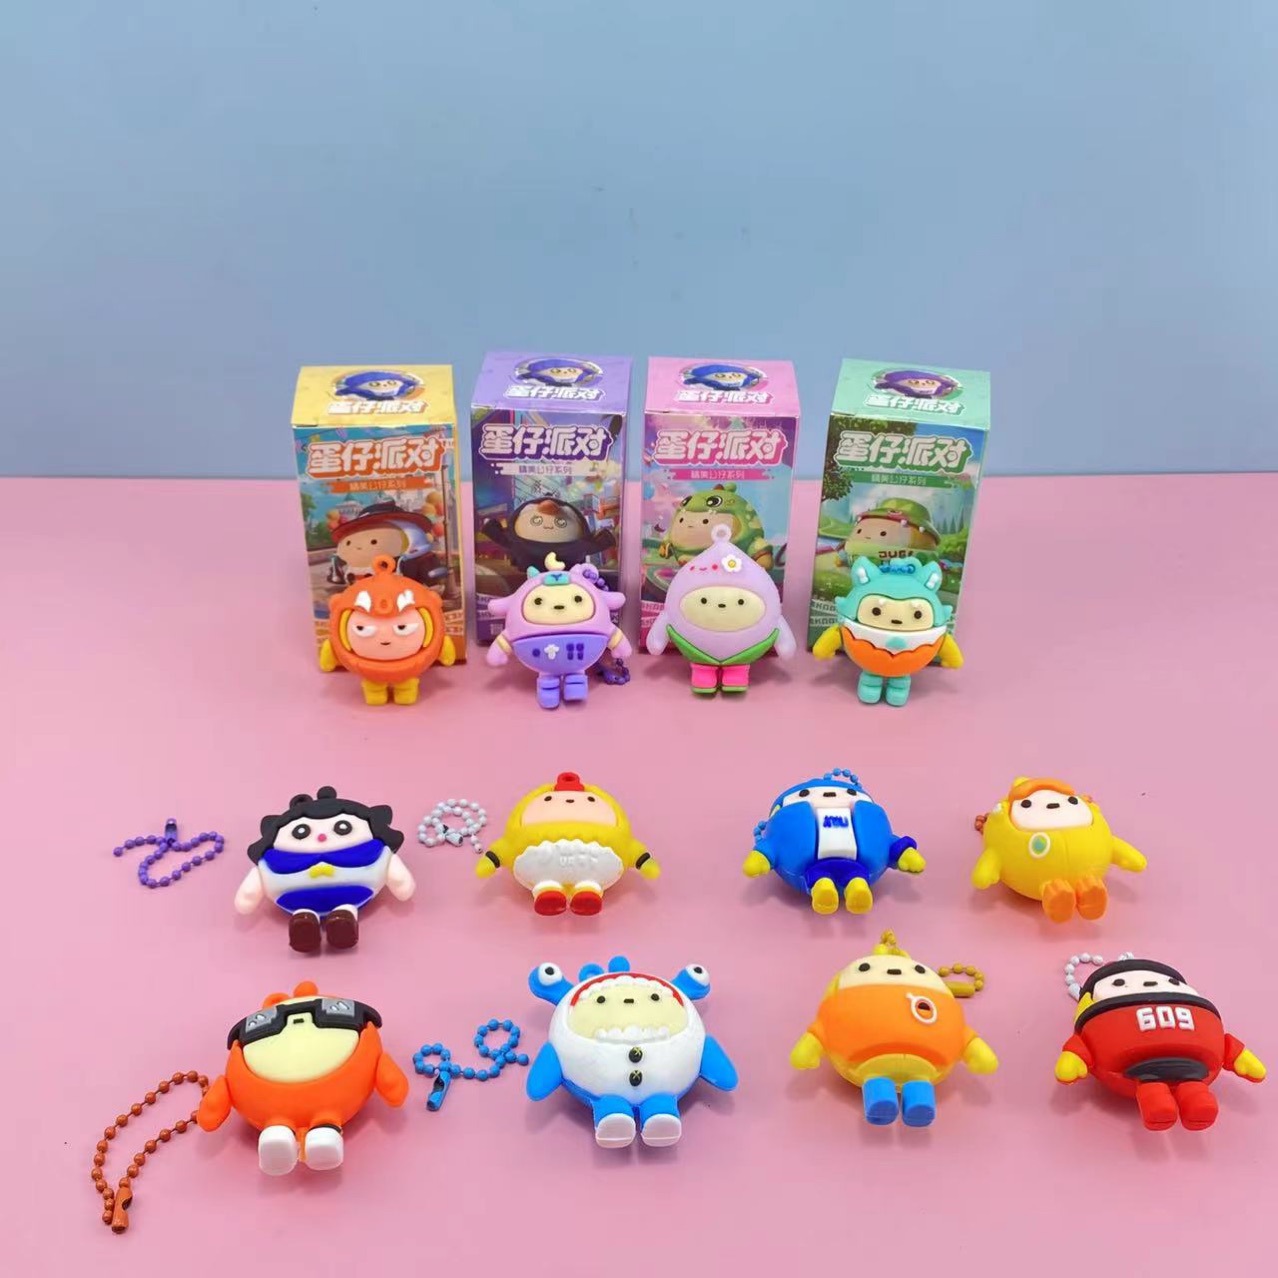 24 into Egg Puff Party Blind Box Game Same Style Handmade Toy Internet Celebrity Keychain Stall Children Student Small Gift